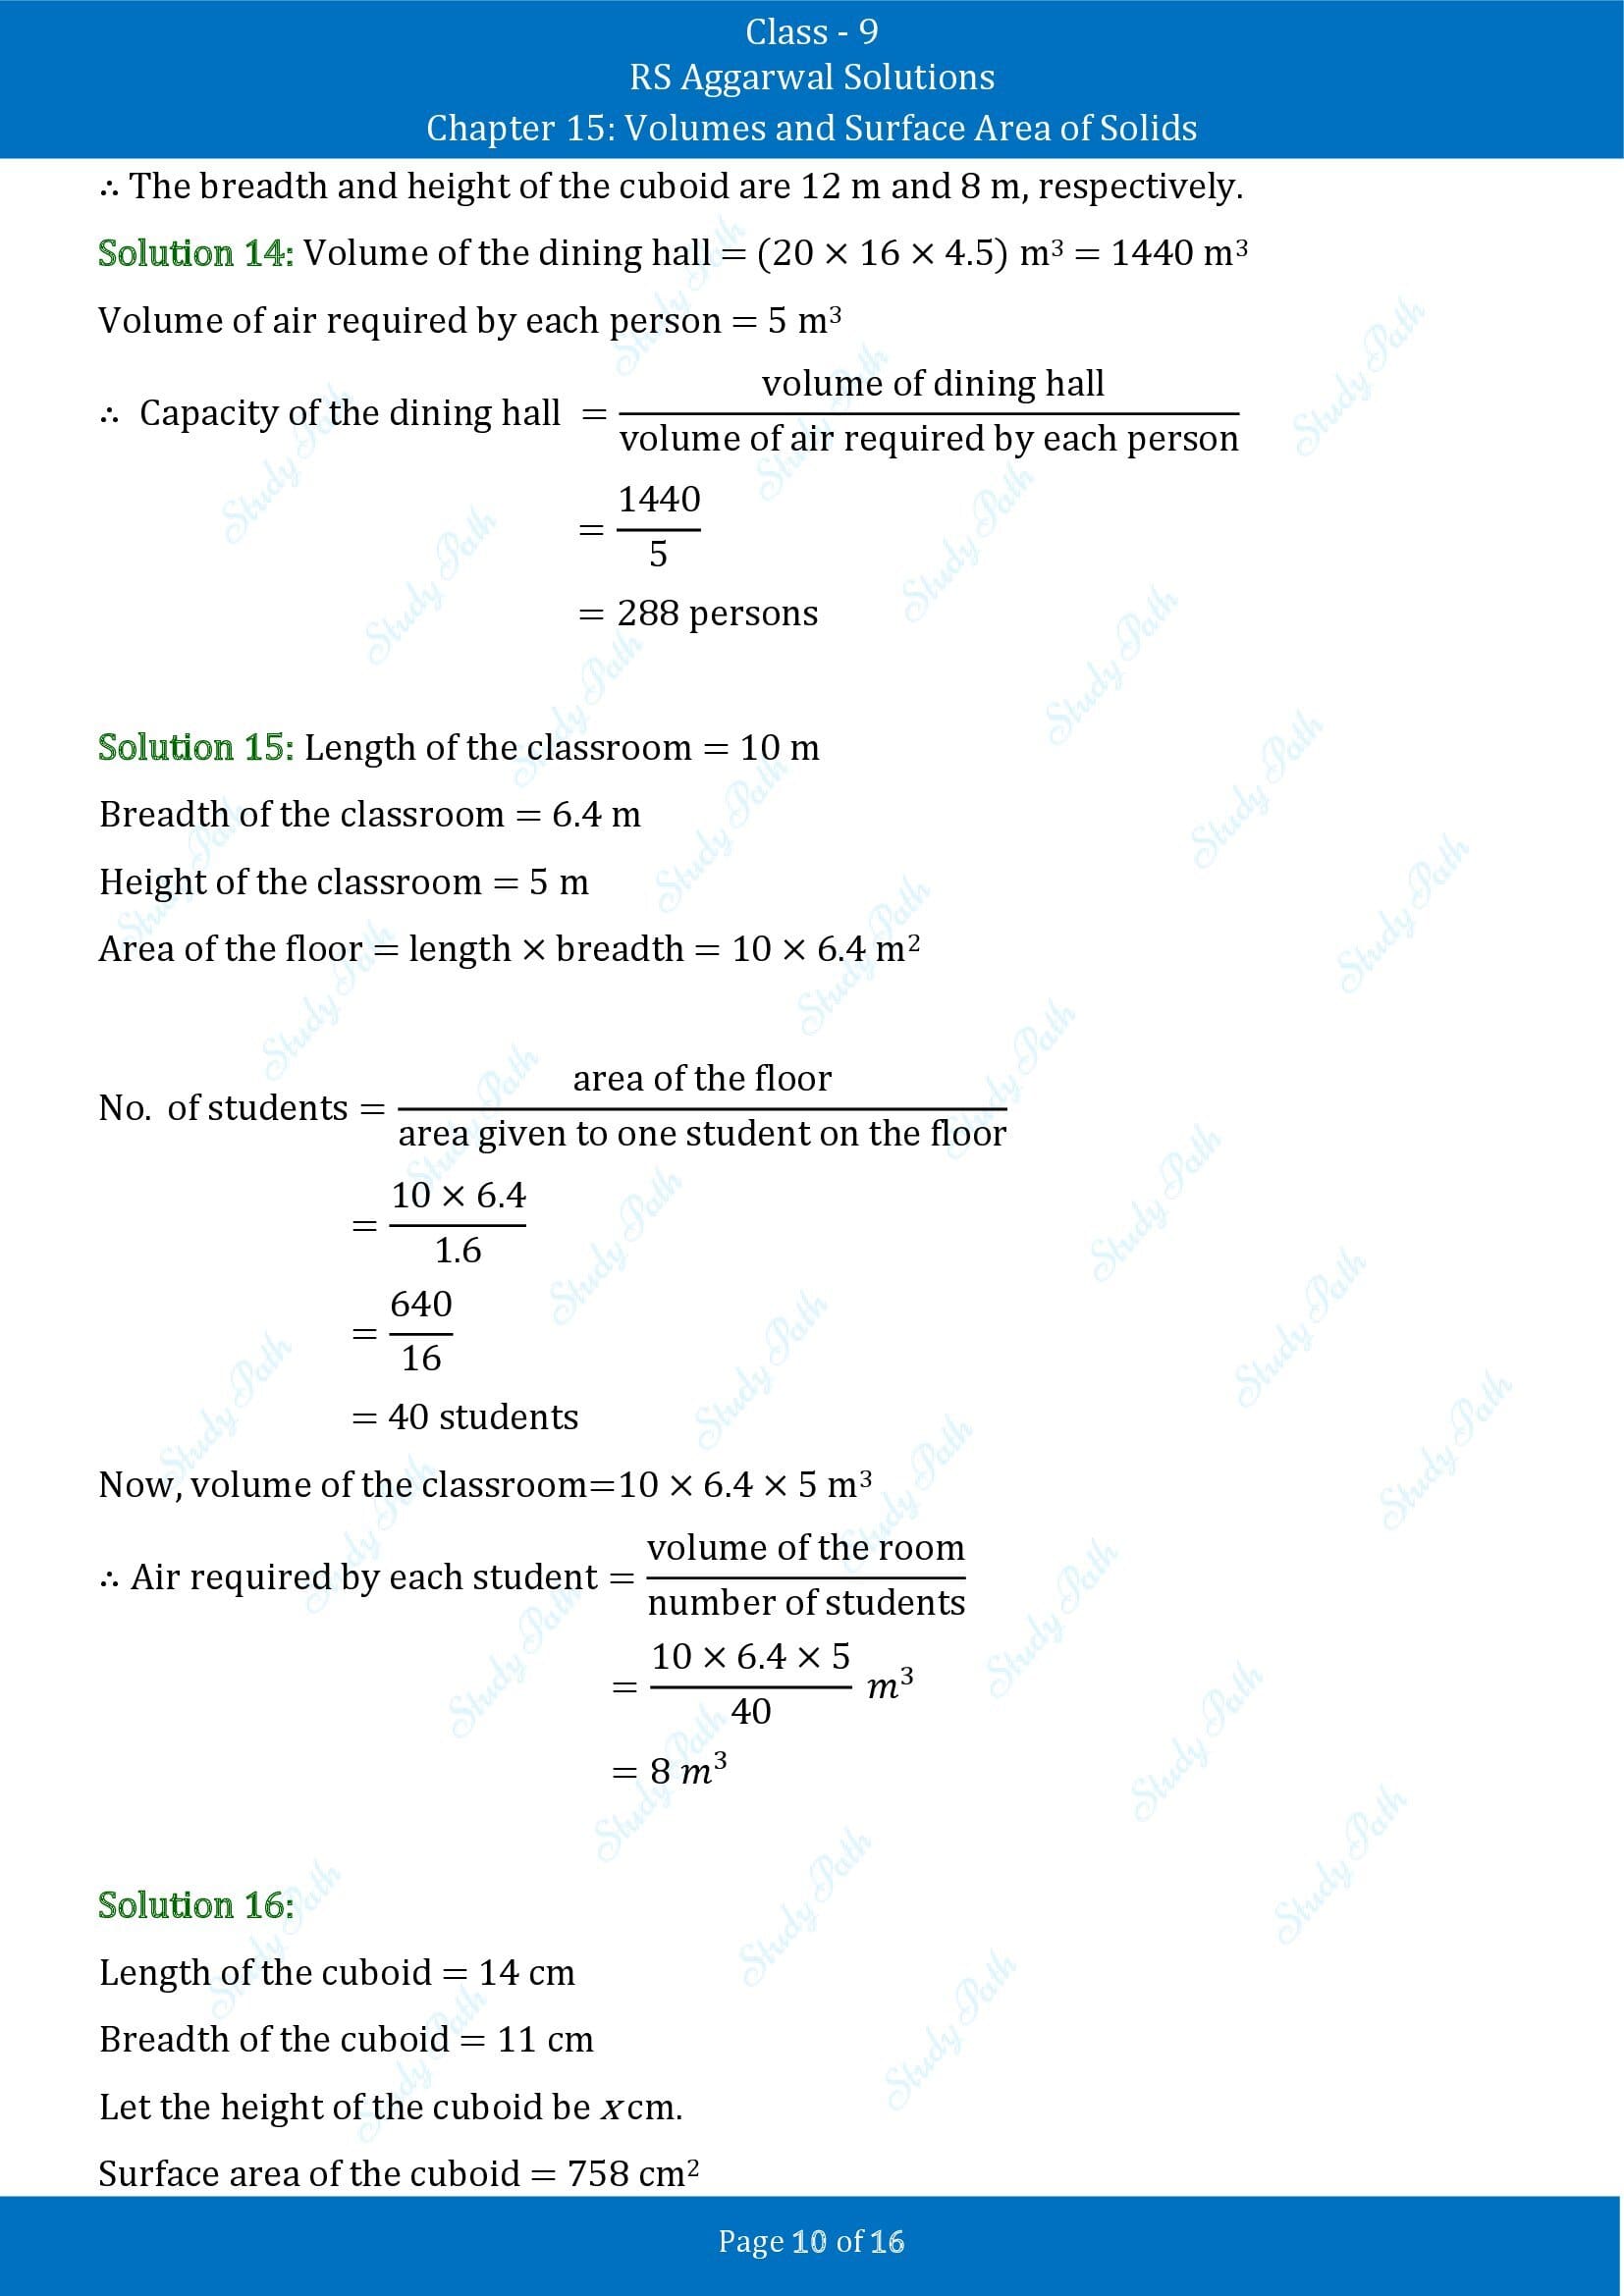 RS Aggarwal Solutions Class 9 Chapter 15 Volumes and Surface Area of Solids Exercise 15A 00010